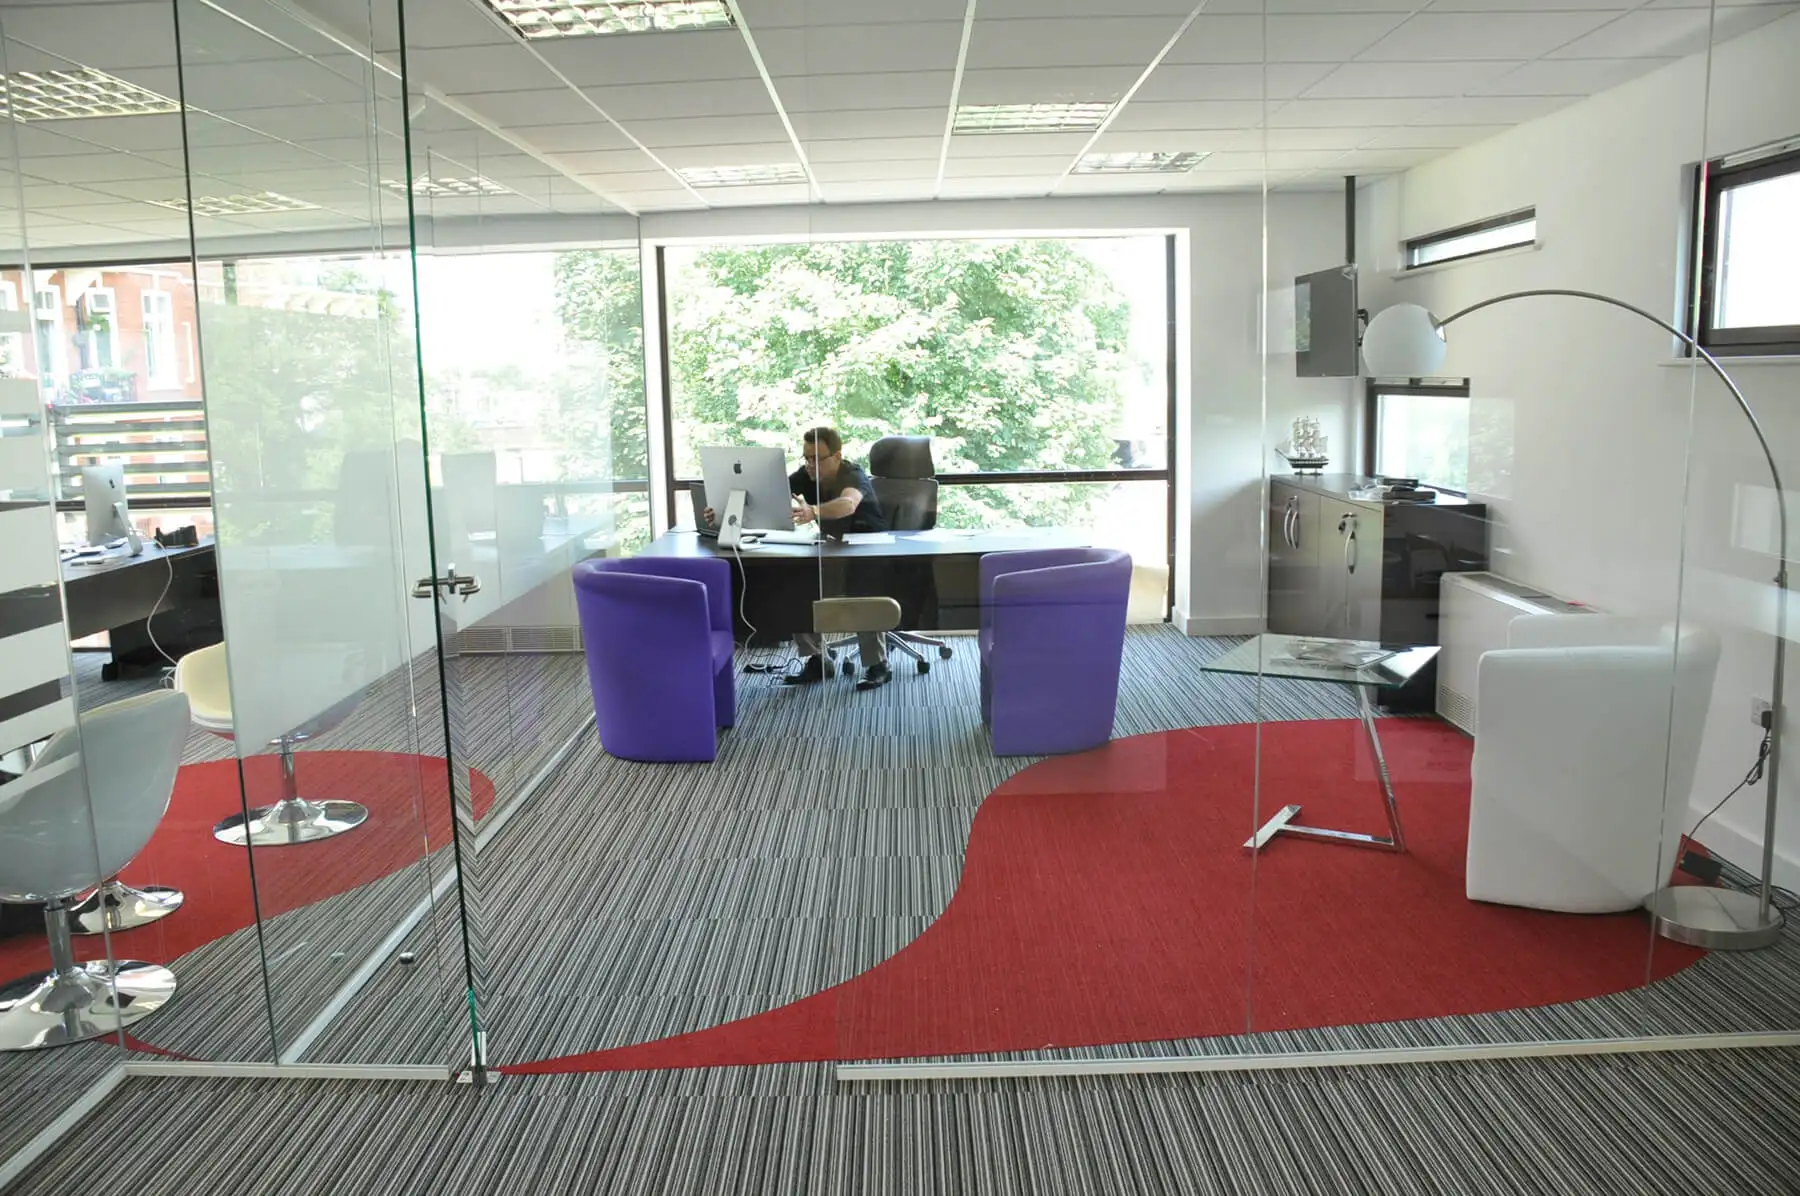 Executive work space with desk chairs armchairs and designer flooring